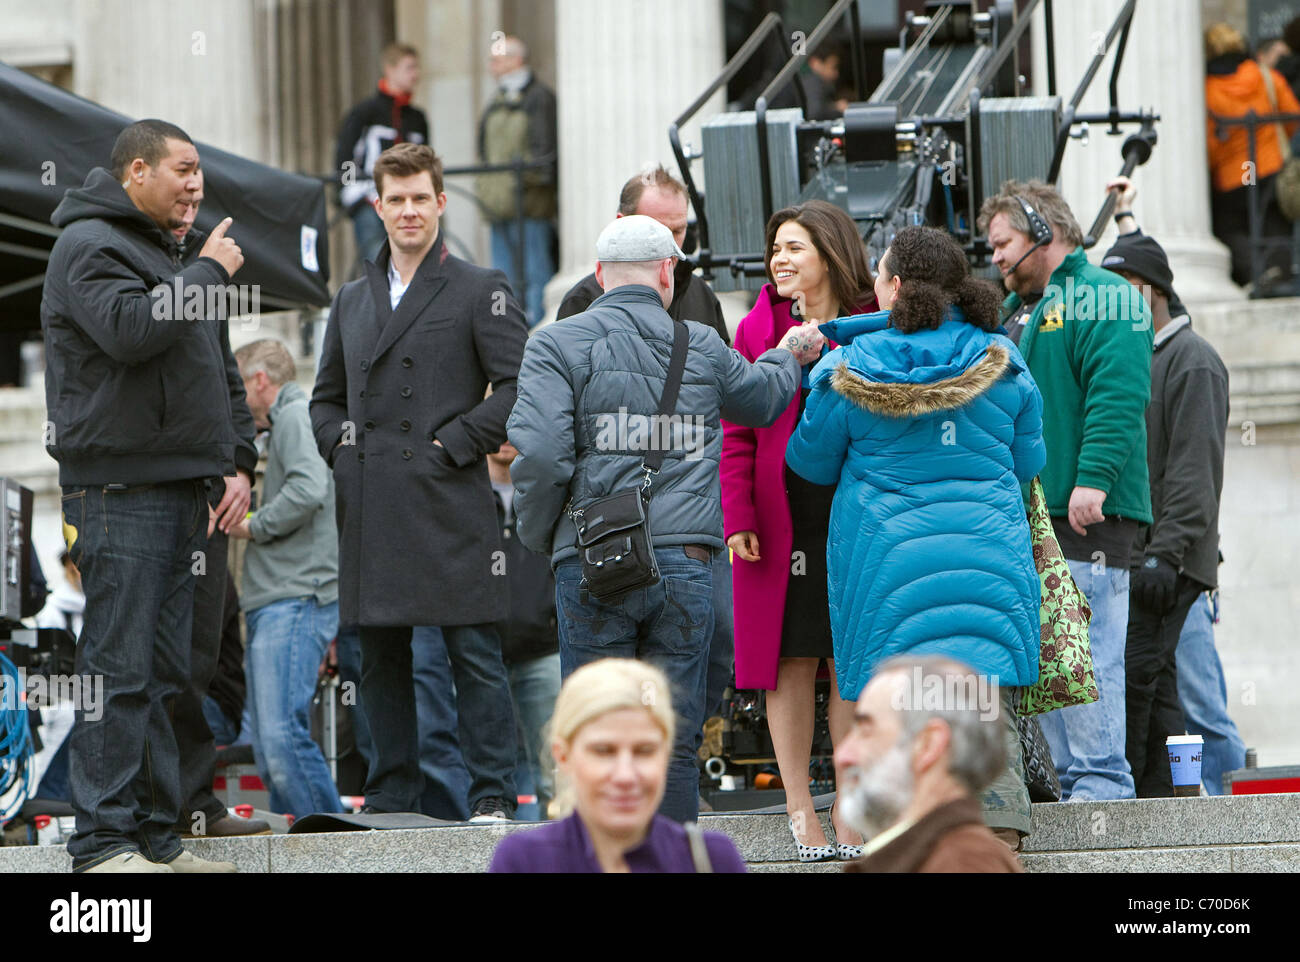 America Ferrera and Eric Mabius America Ferrera and Eric Mabius filming on  location for the final episode of 'Ugly Betty' in Stock Photo - Alamy